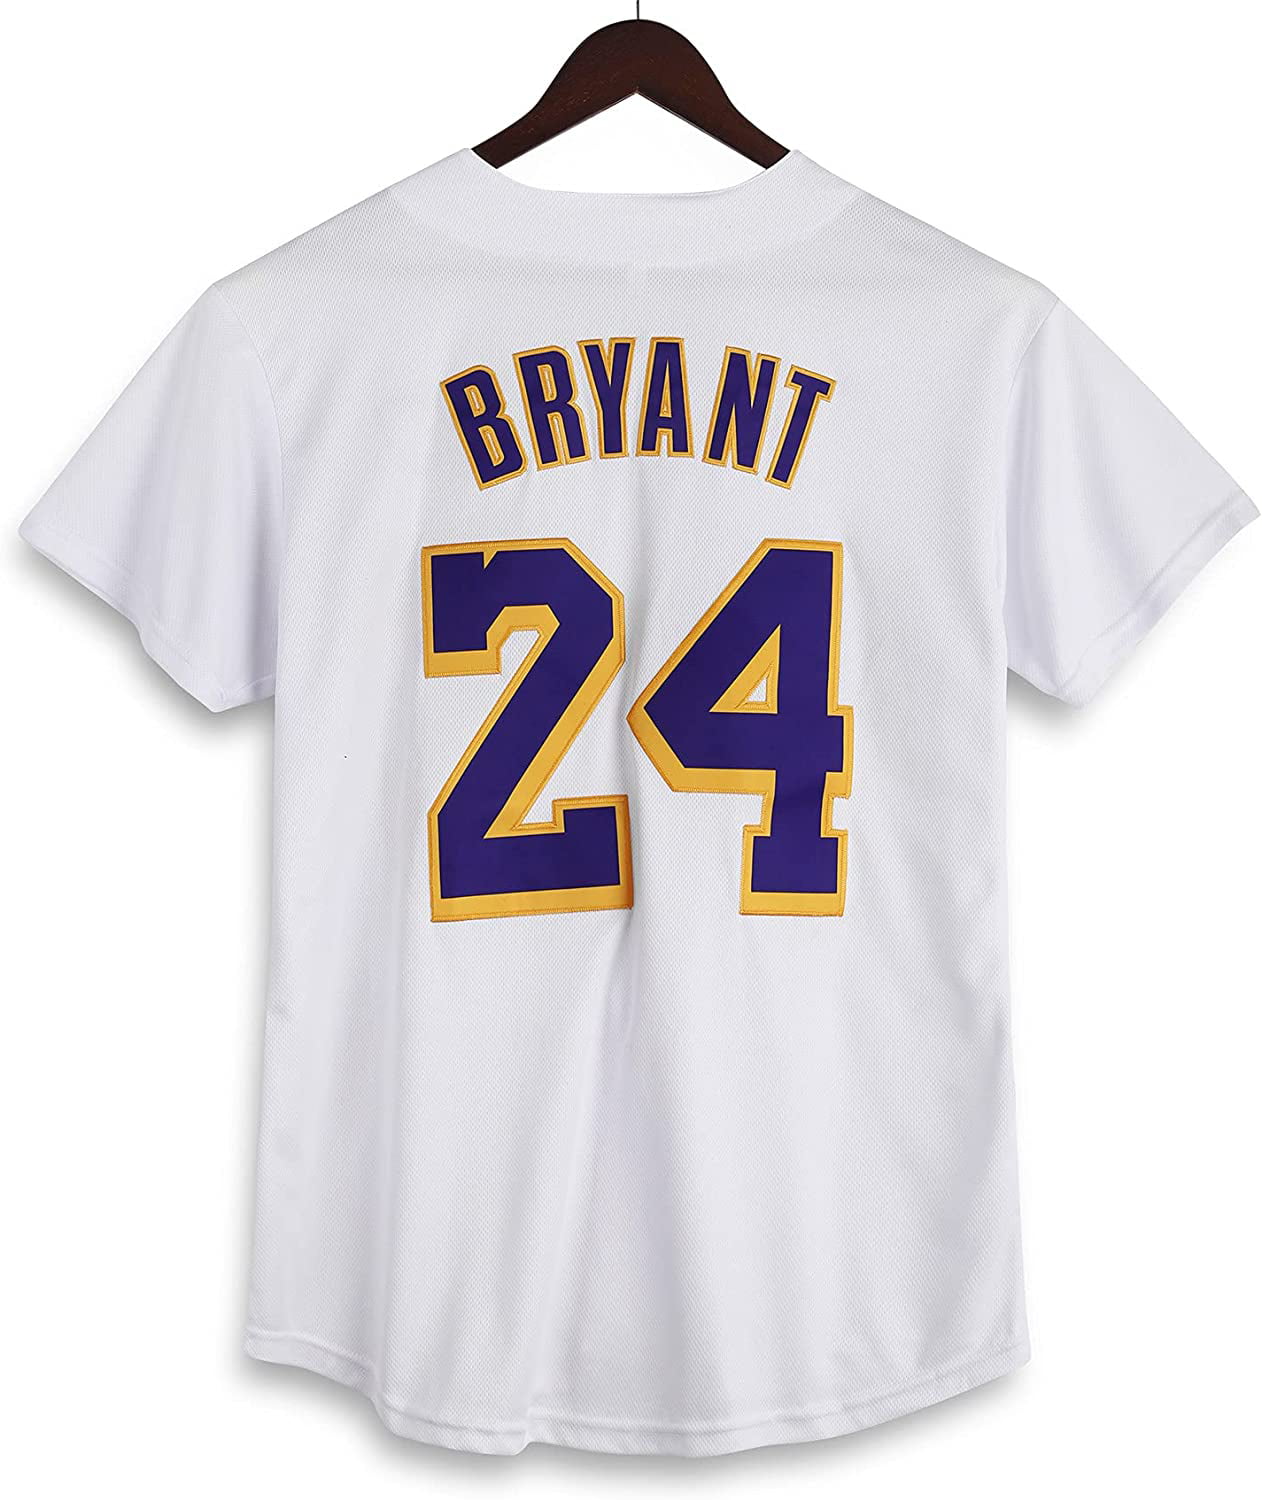 Halloween,X-max Mamba 24 Bryant Jersey Unisex 90s Clothing Hip hop Shirt Baseball Jersey for Jersey Theme Party 